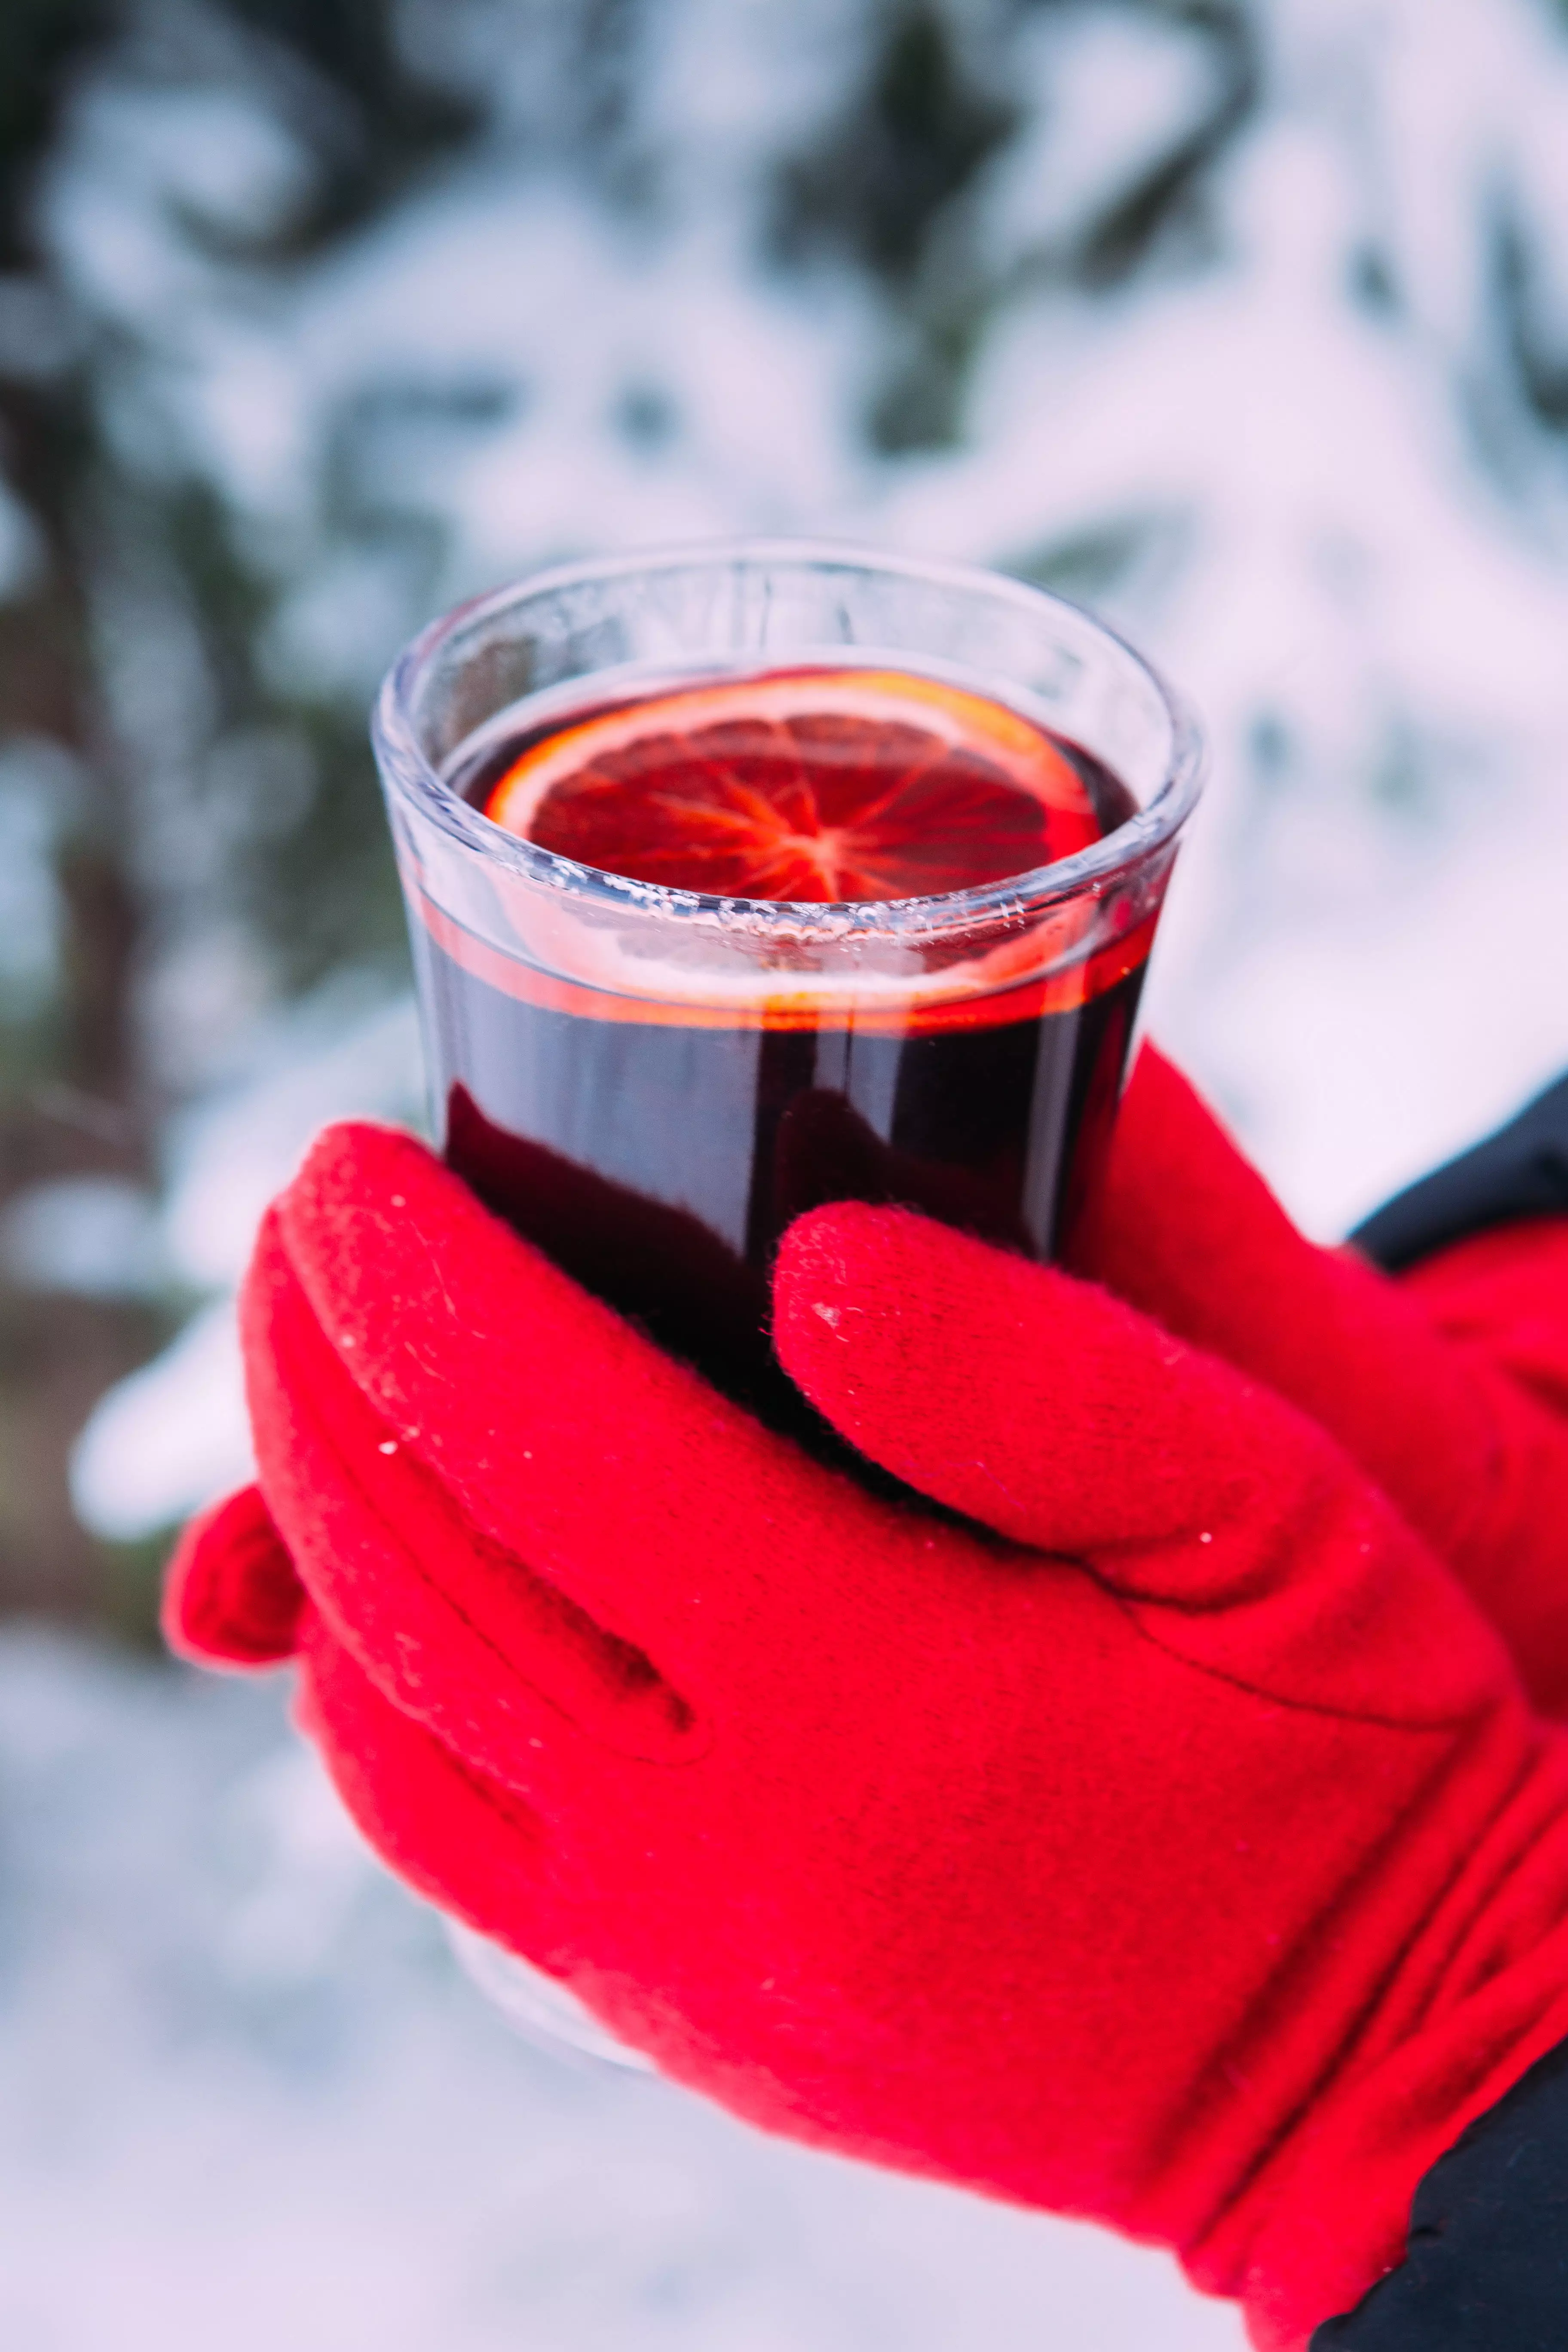 Never too early for a mulled wine either, right?